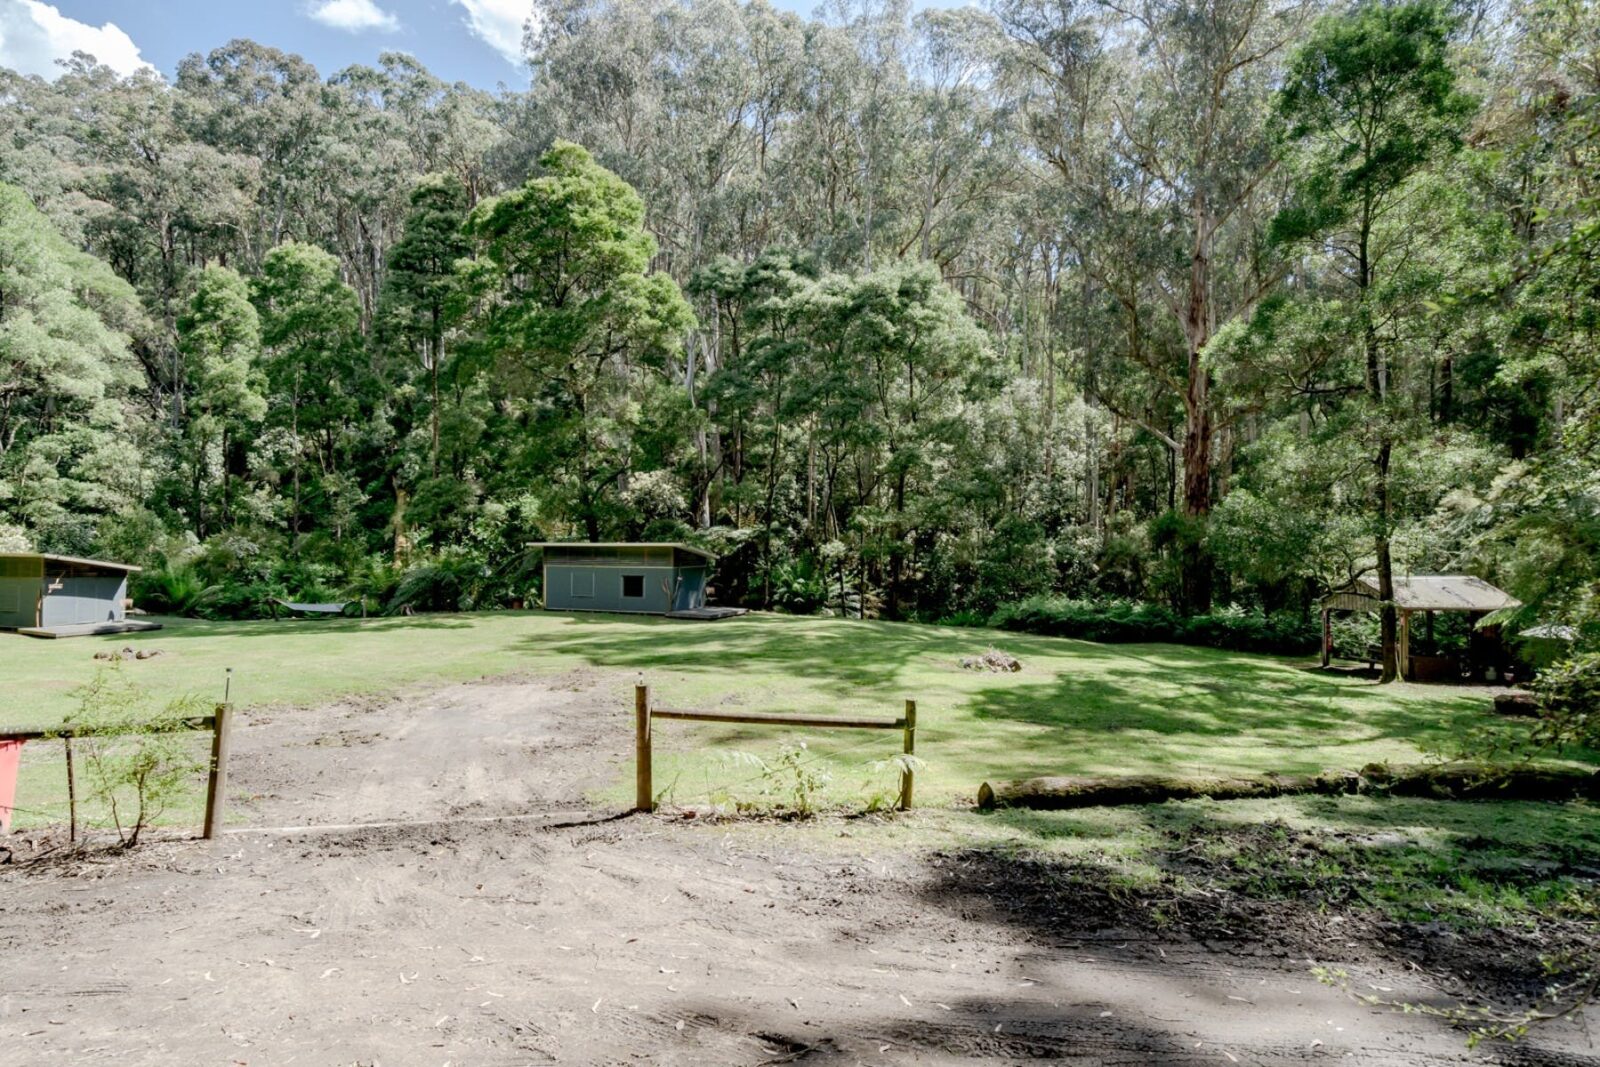 King Parrot Campground entrance